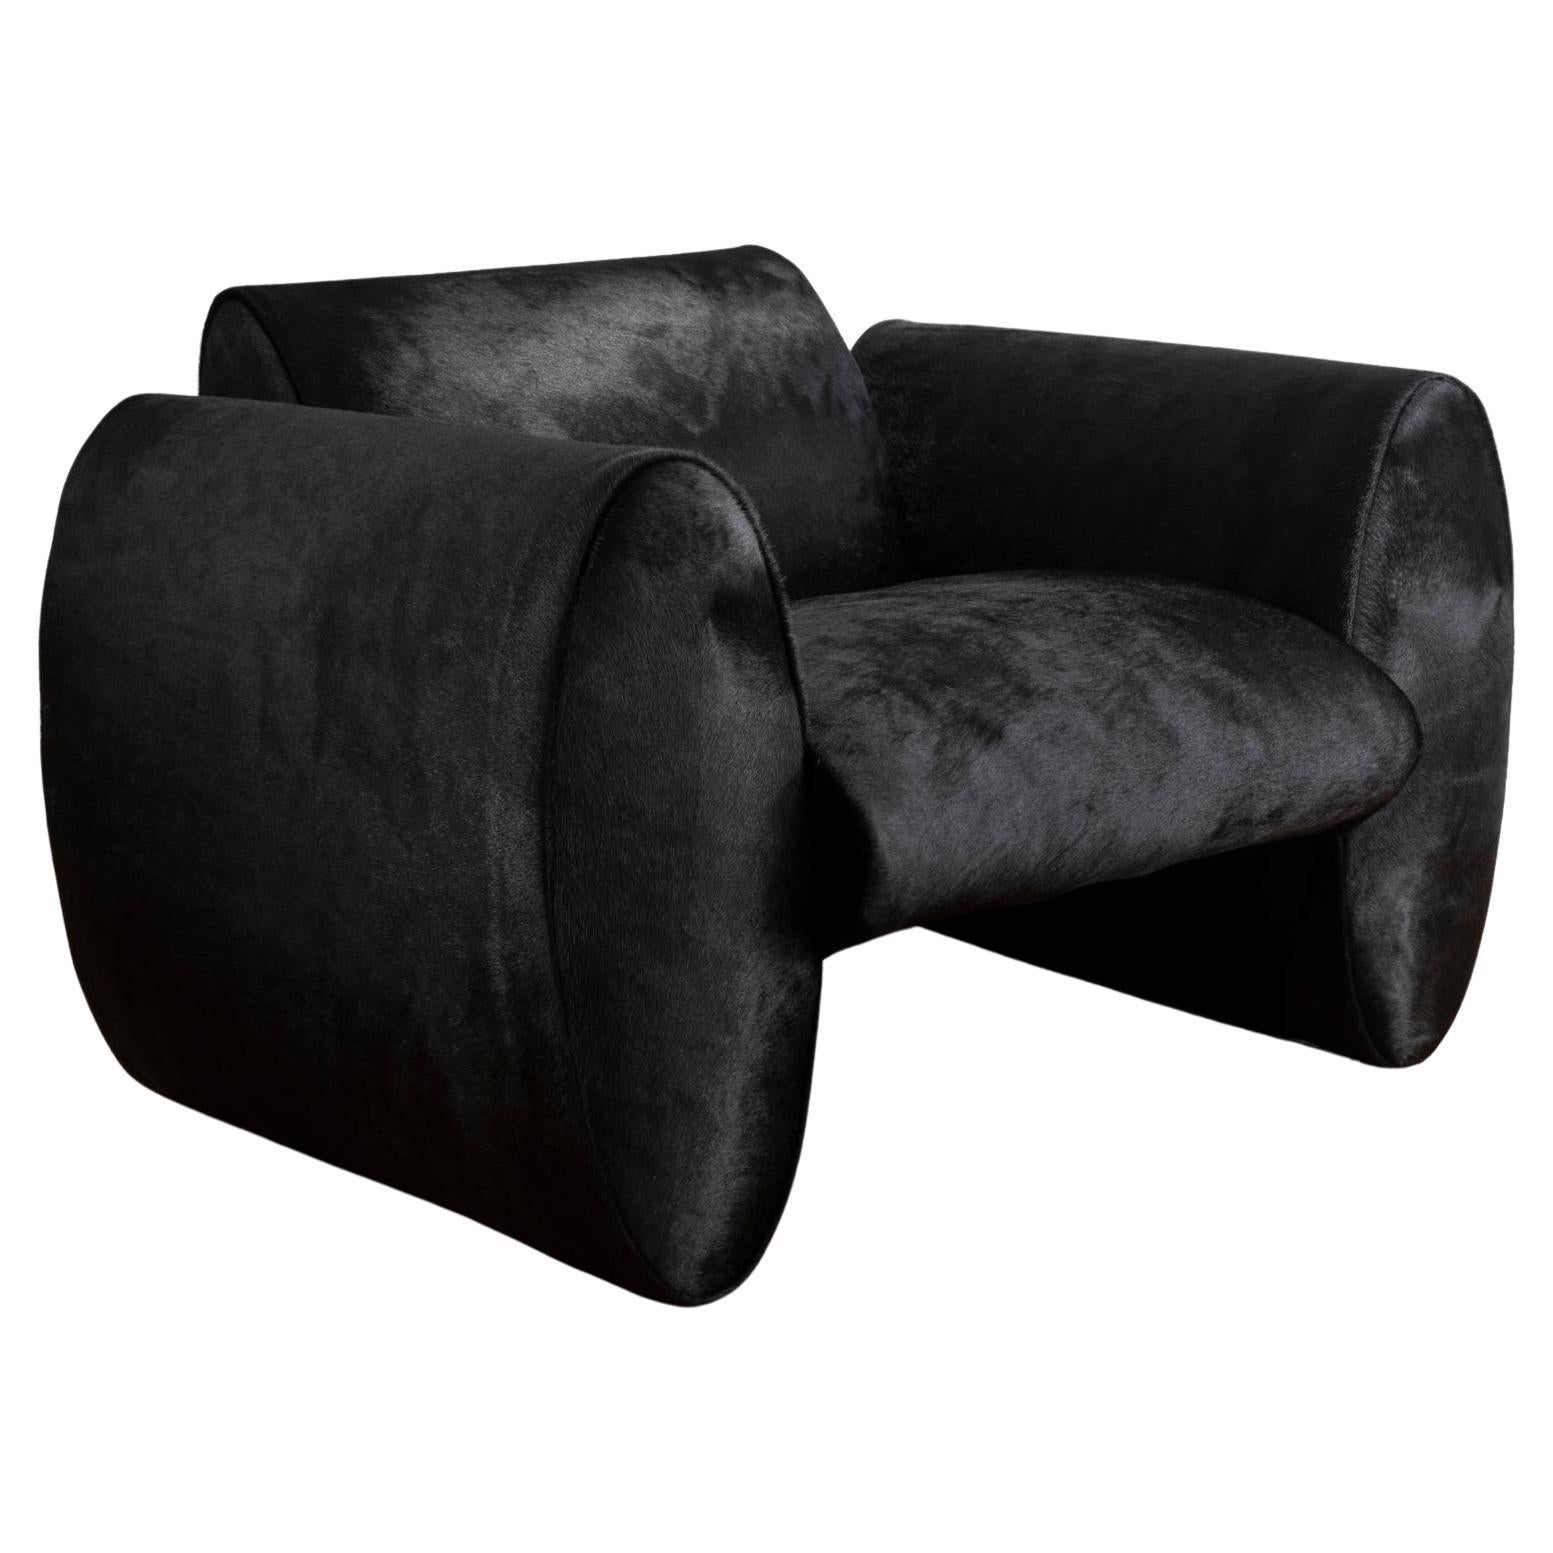 Upholstered Armchair or Club Chair in Black Hair-on-Hide Designed by EJR Barnes For Sale